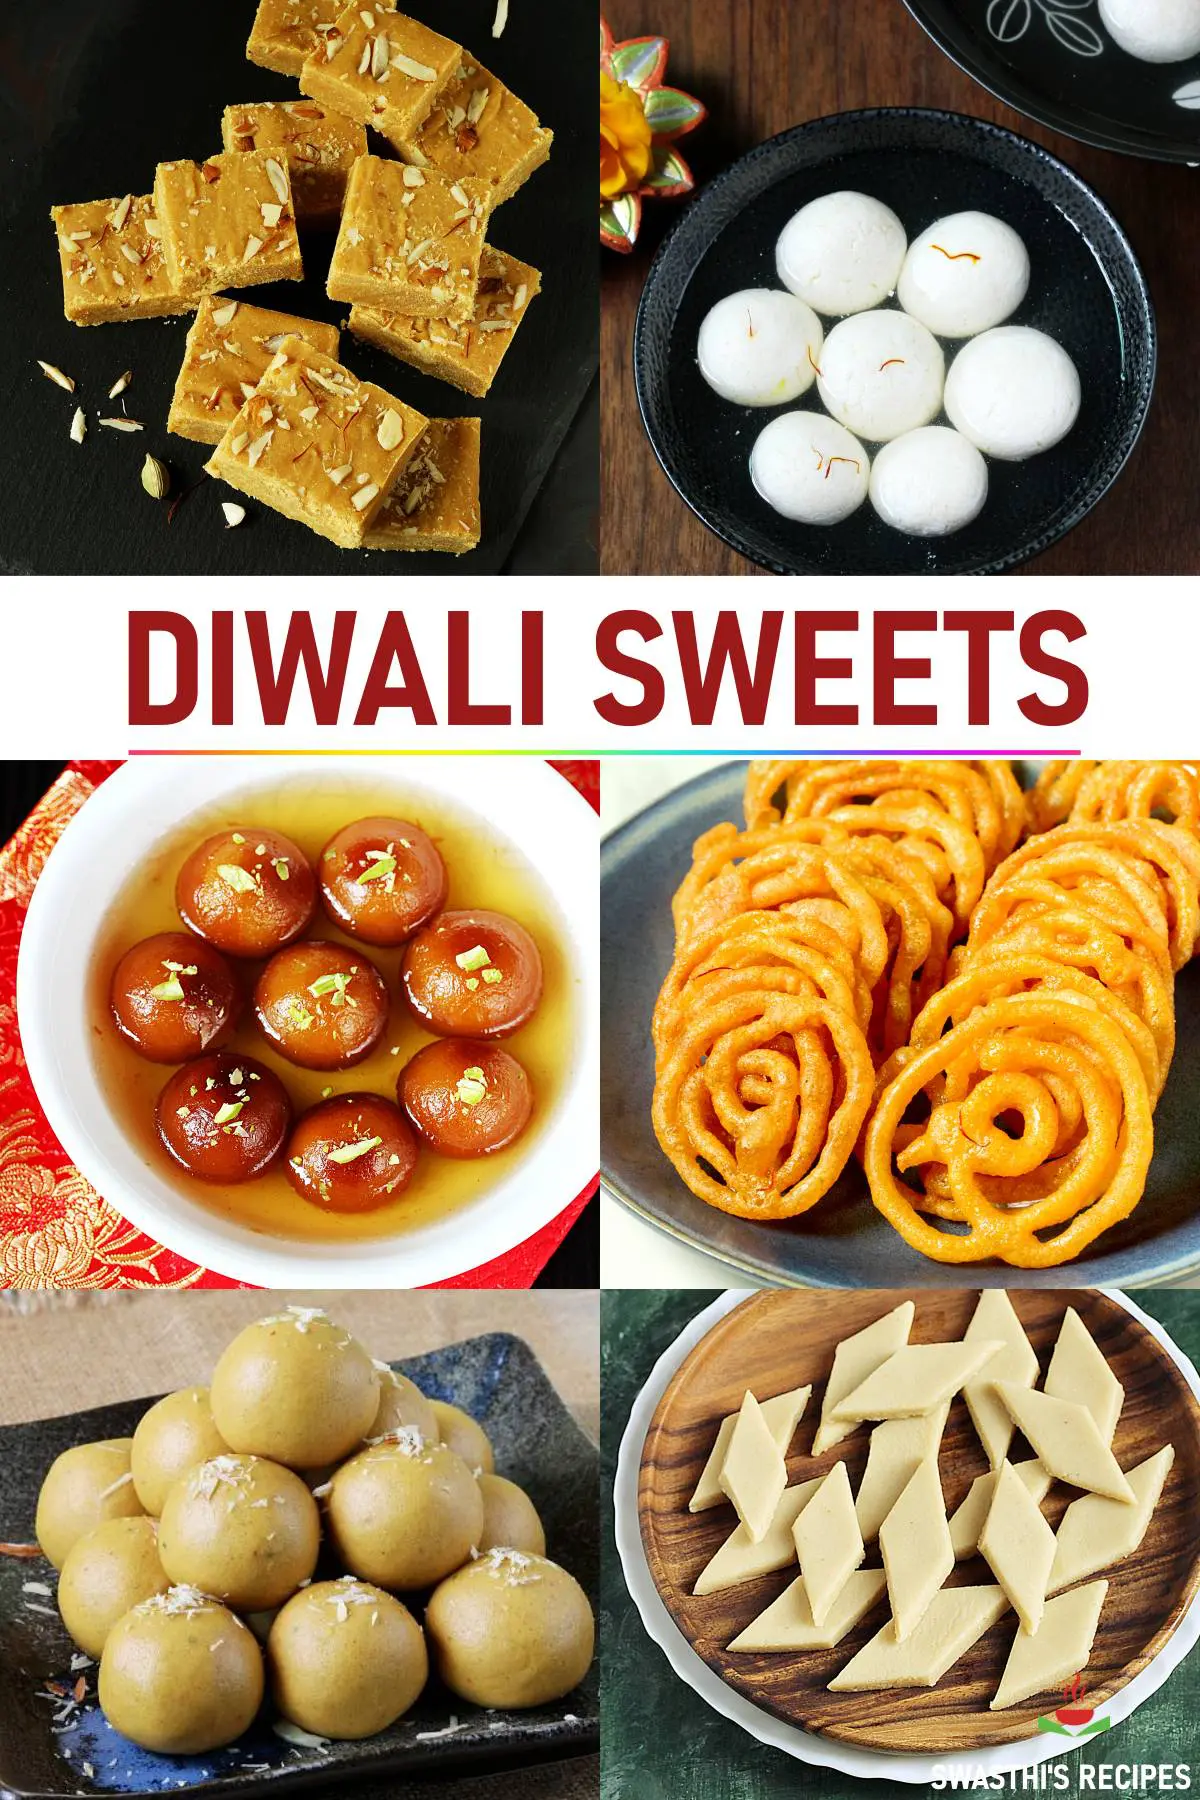 Buy delicious festive sweets diwali hamper in Bangalore, Free Shipping -  redblooms